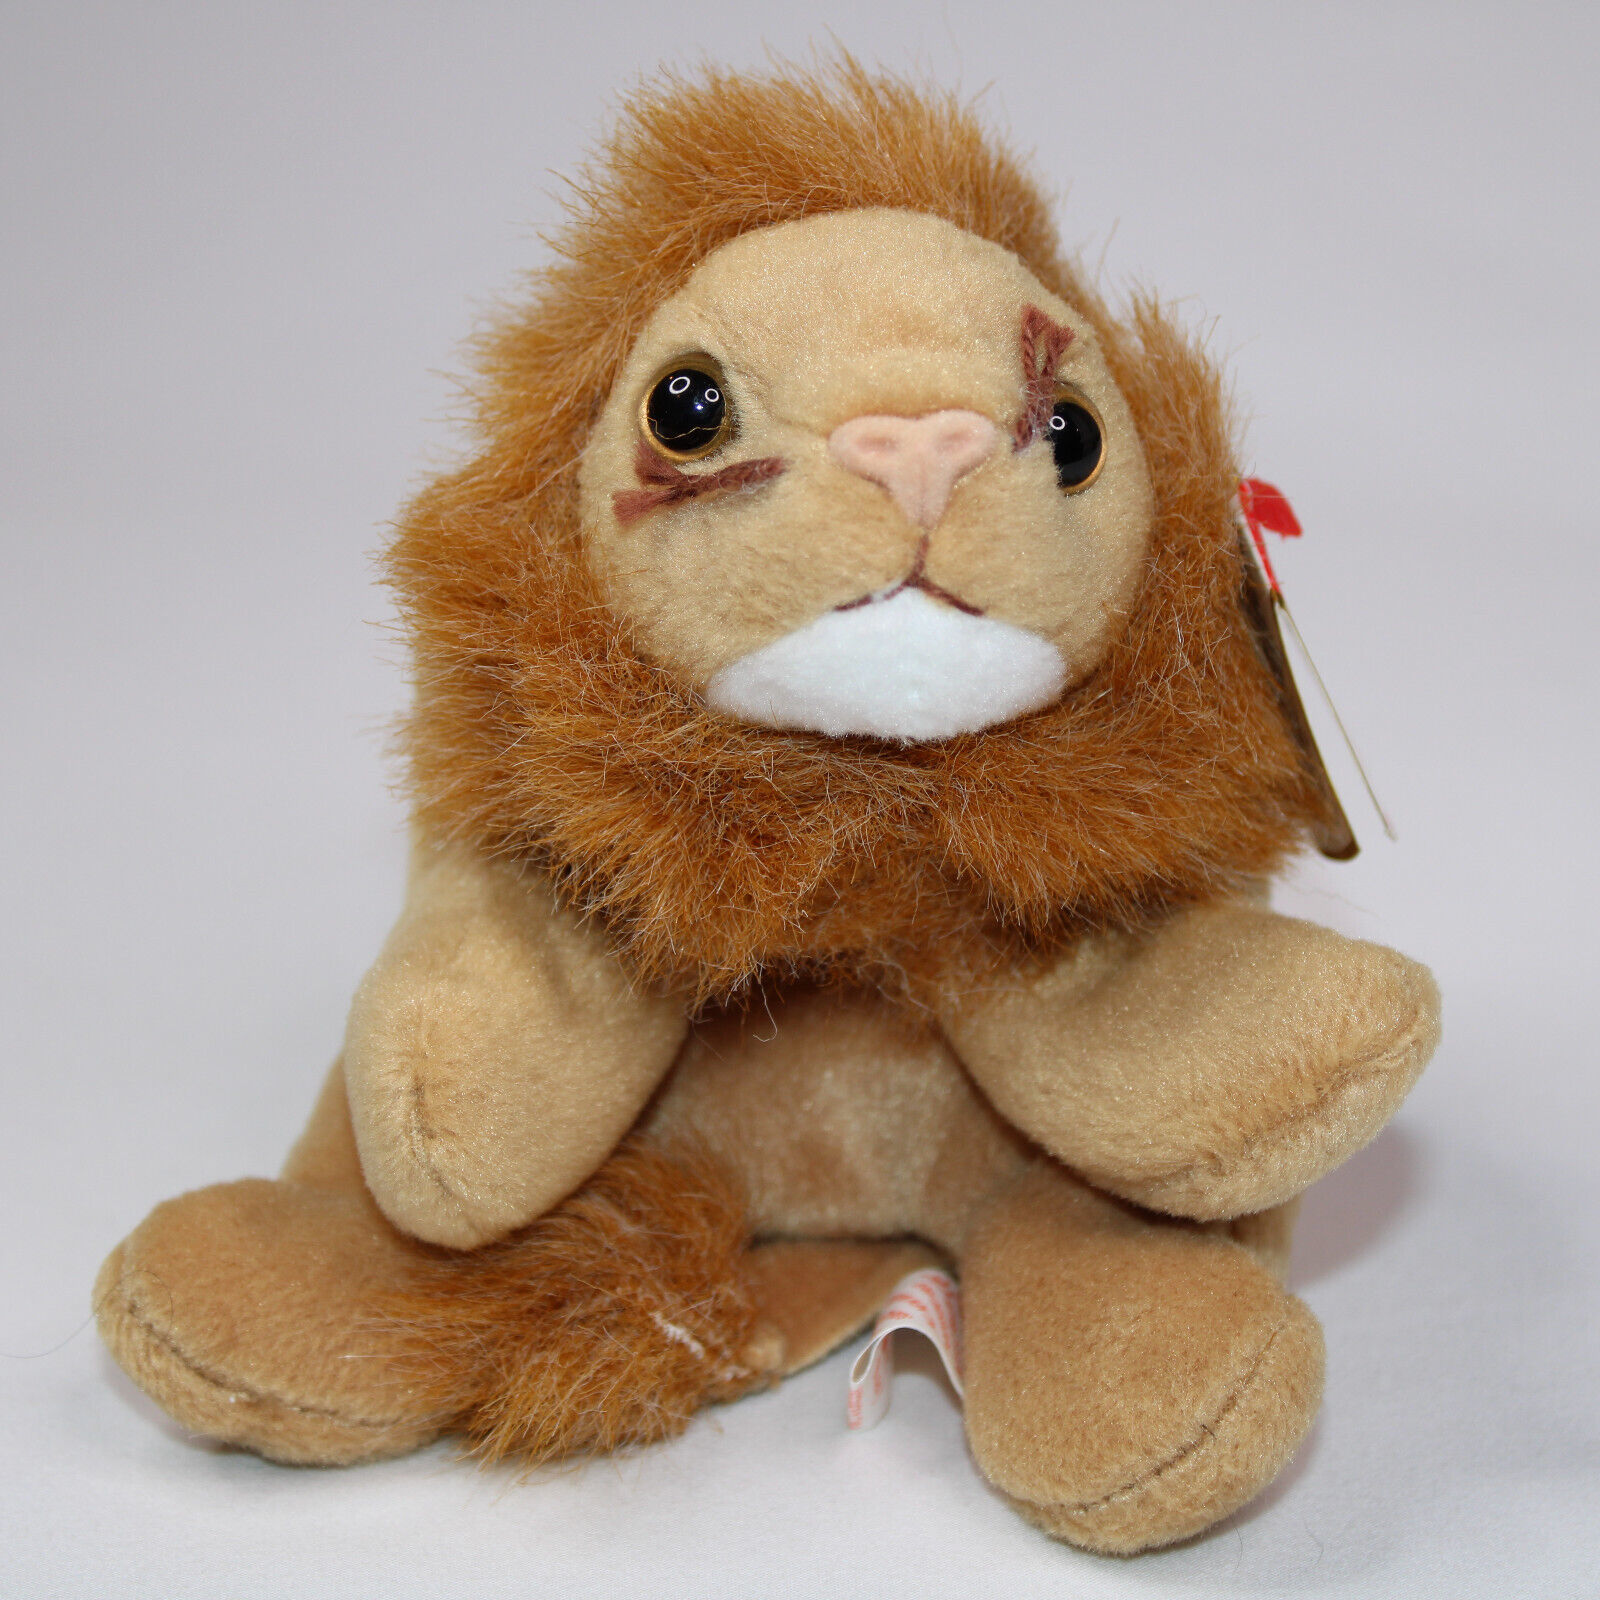 RARE 1996 TY Beanie Baby Roary The Lion With Tags Style 4069 PVC Pellets Vintage - $9.74